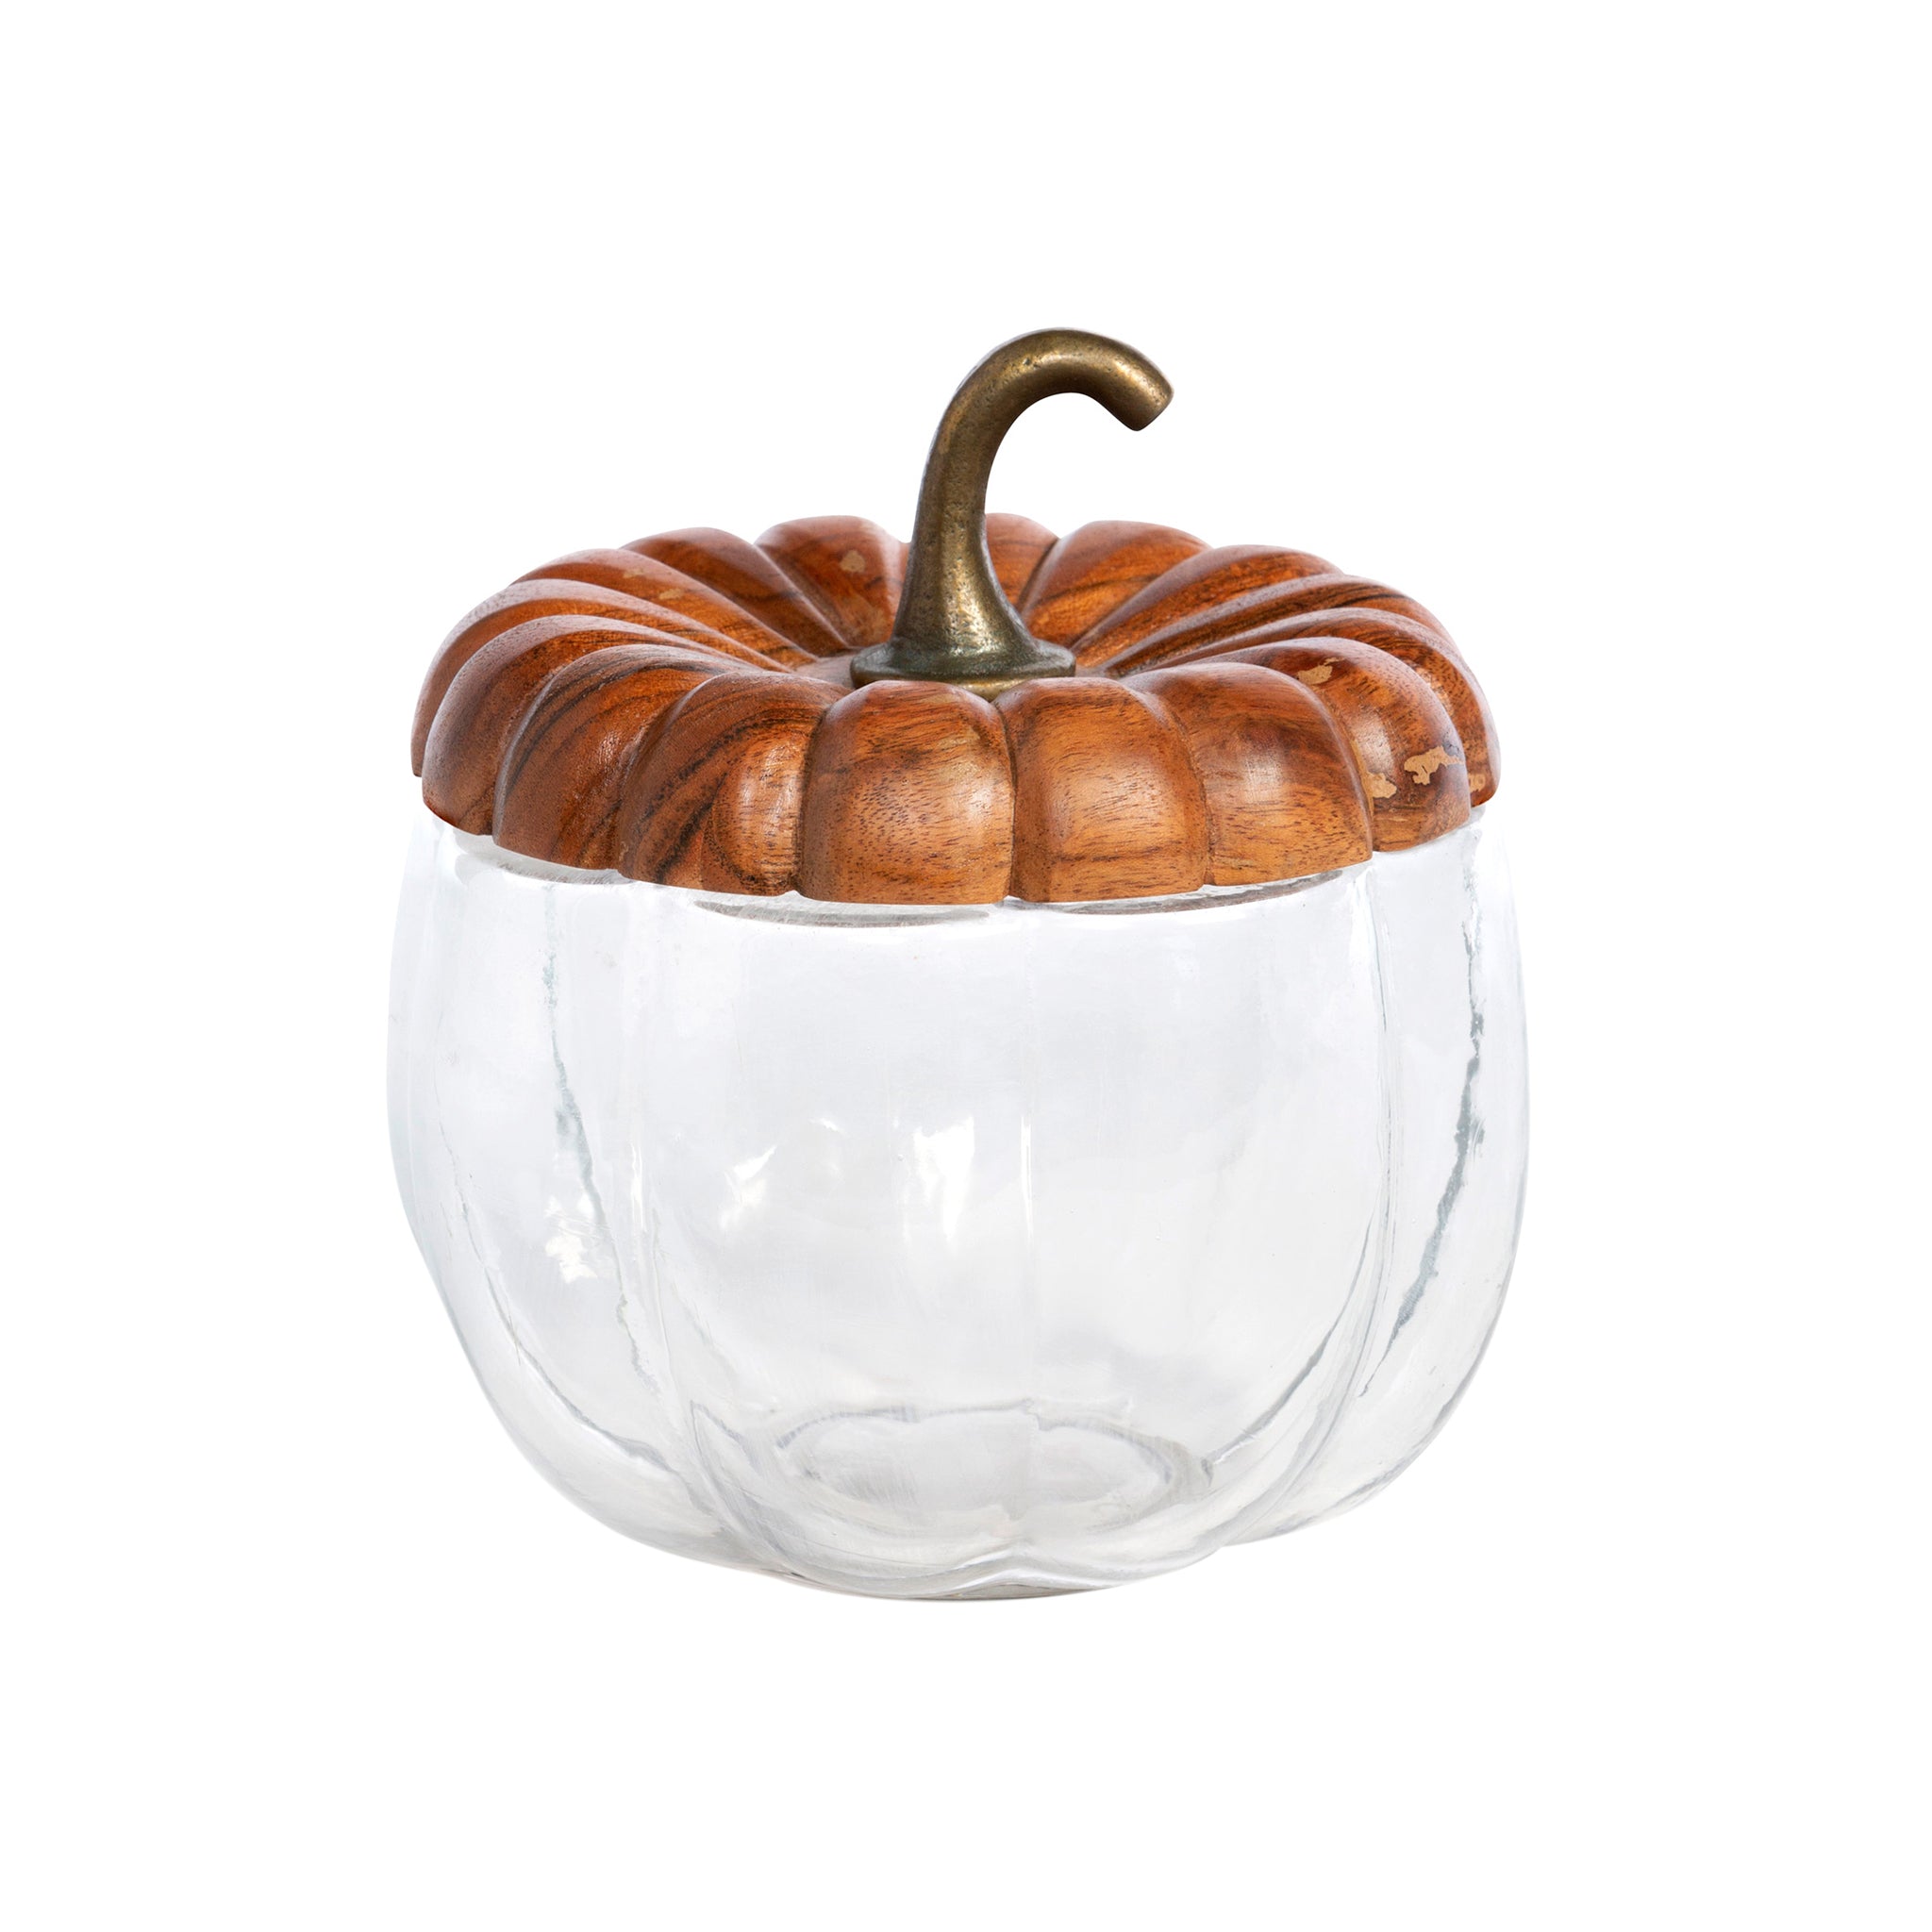 Winter Squash Canister